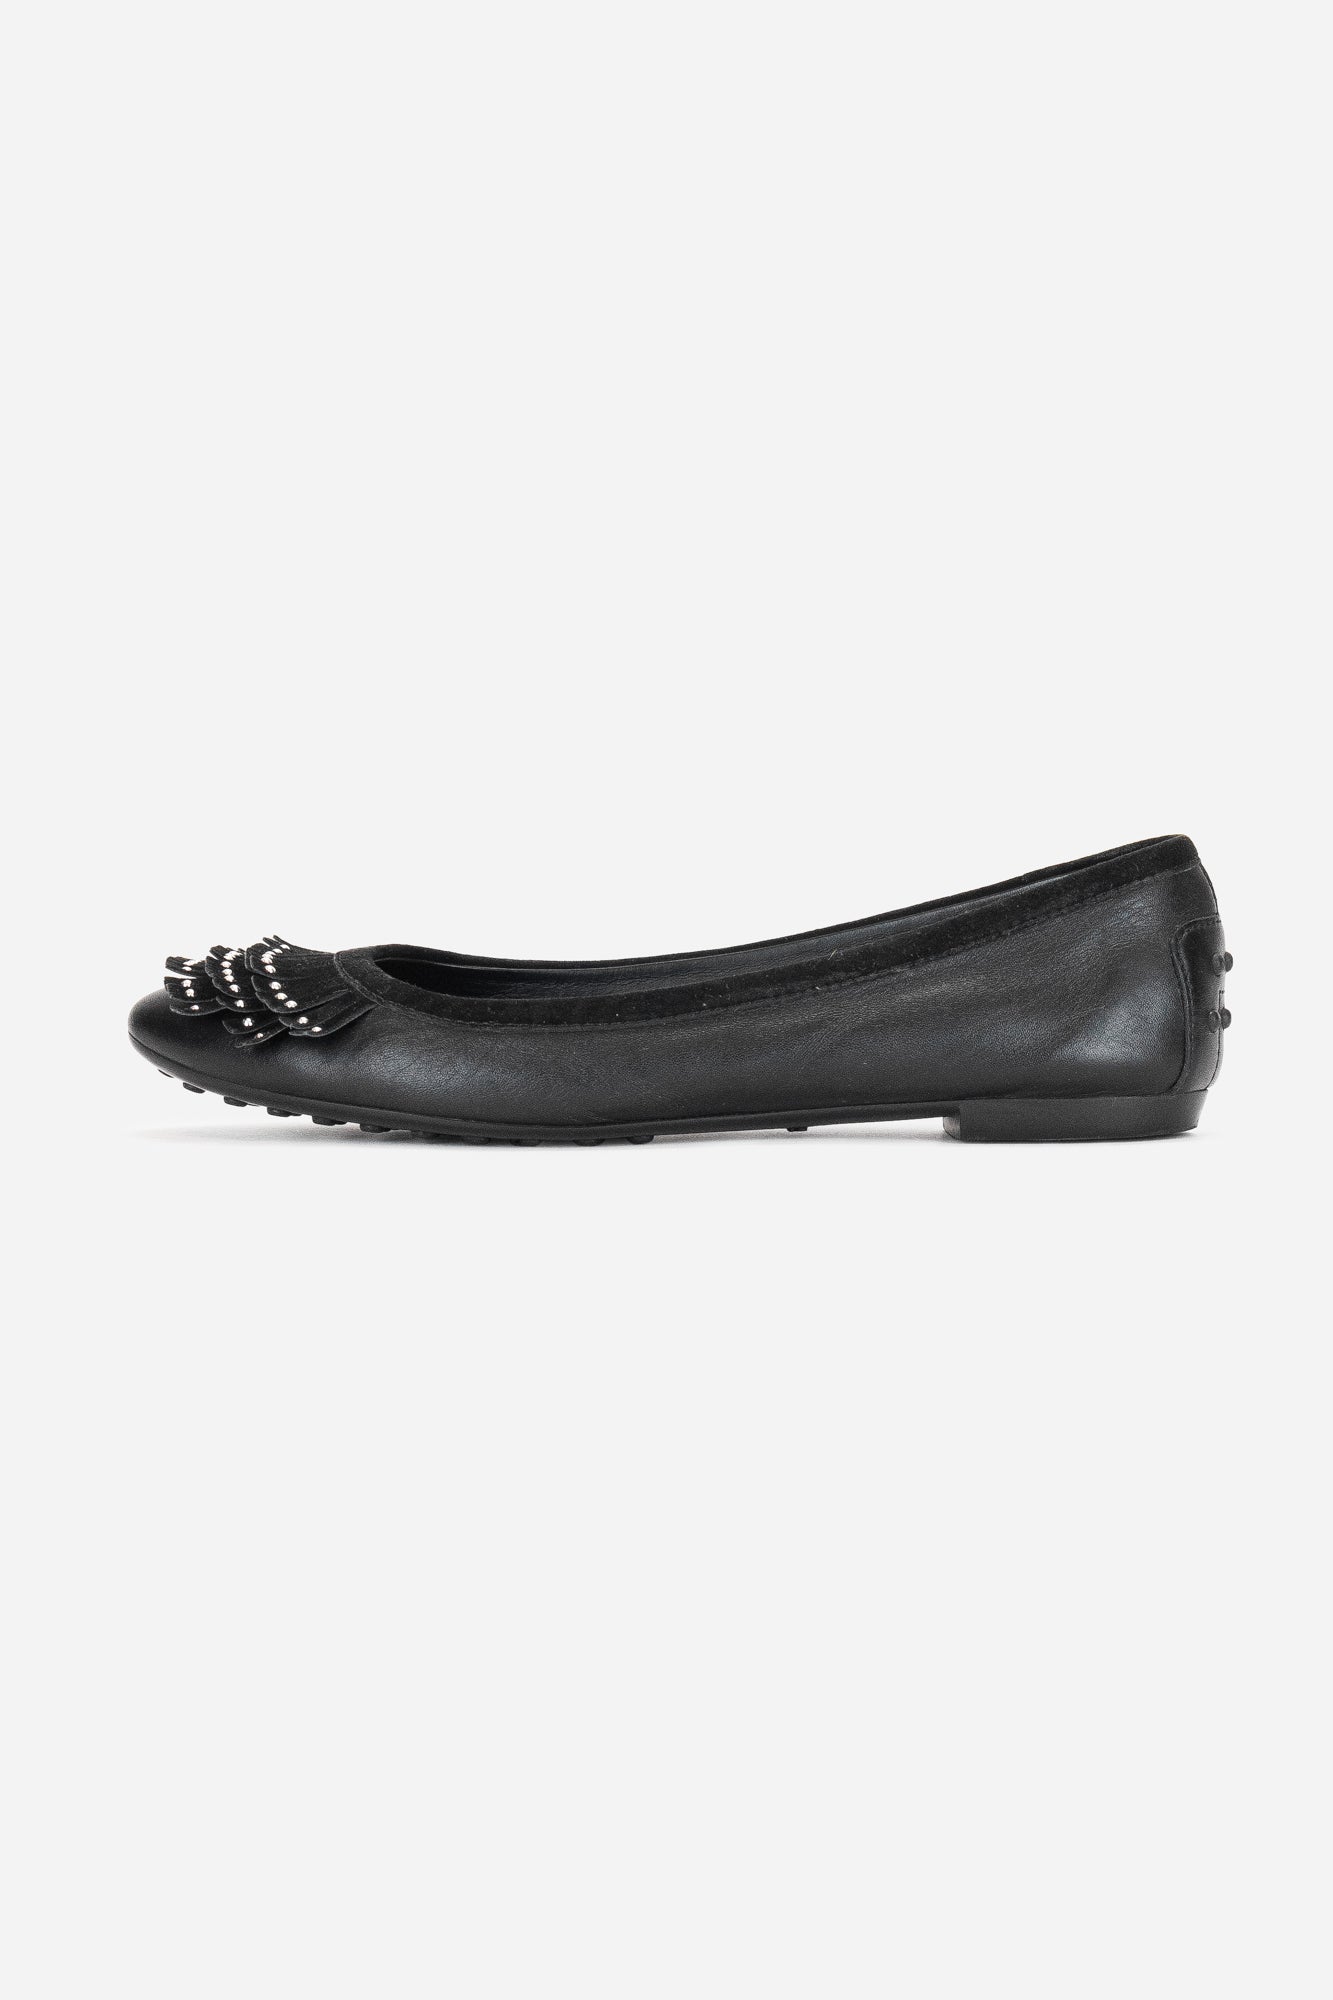 Black Suede Fringed Studded Flats - So Over It Luxury Consignment